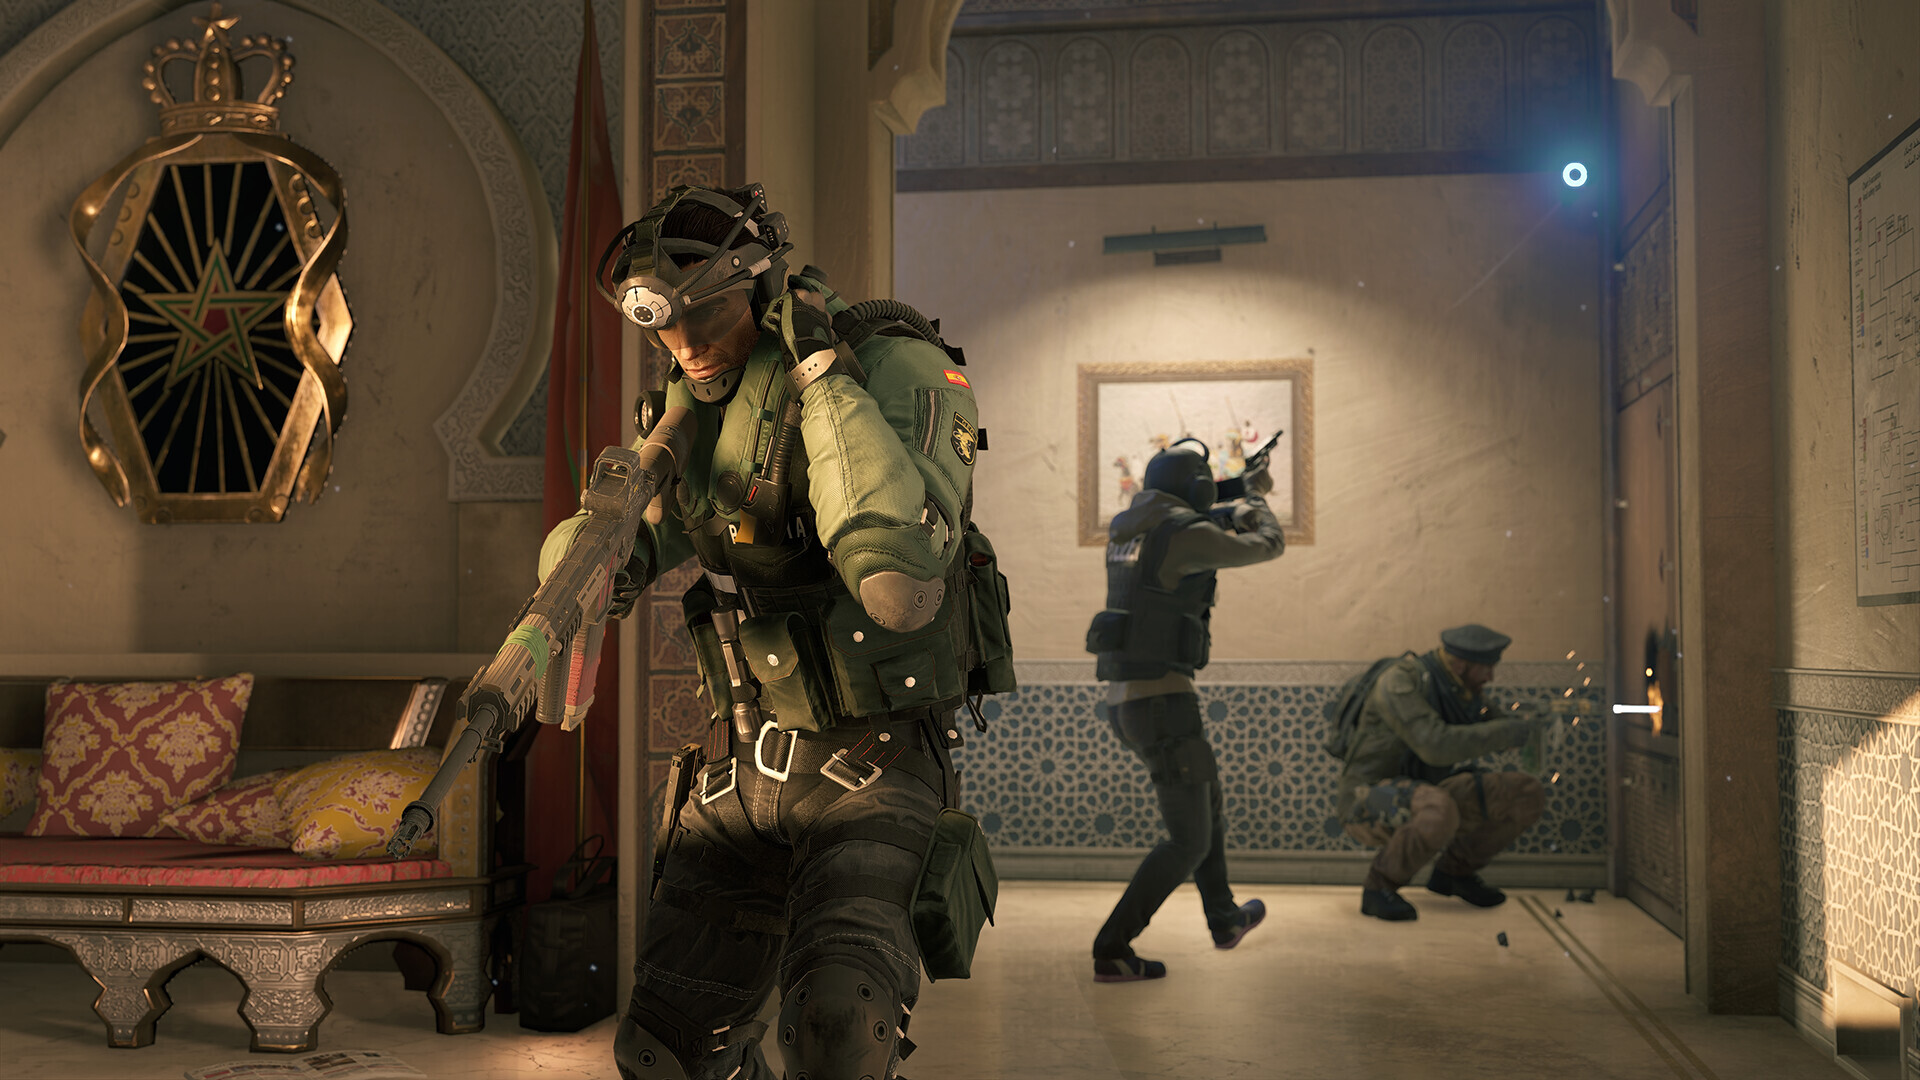 Tom Clancy's Rainbow Six Siege - Year 5 Pass at the best price